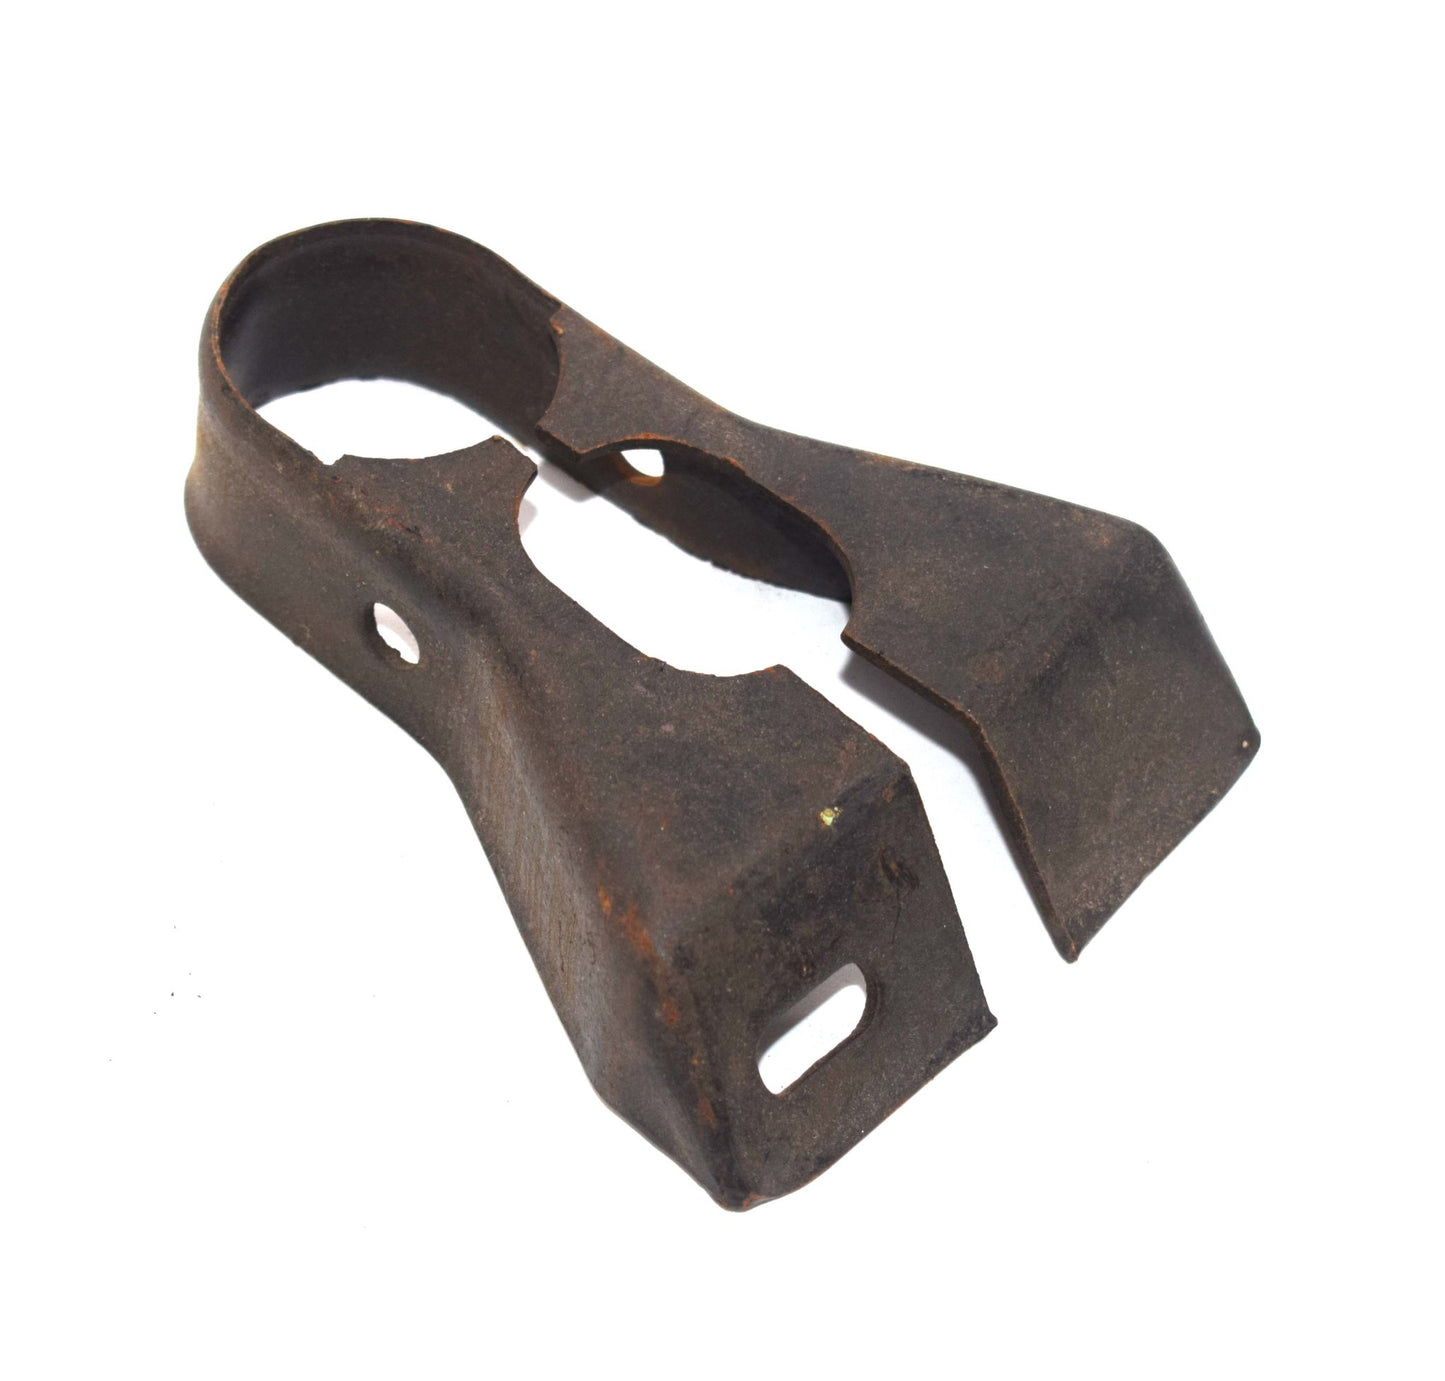 Steering Column Bracket, 1950-1955 Willys Station Wagon 2WD - The JeepsterMan